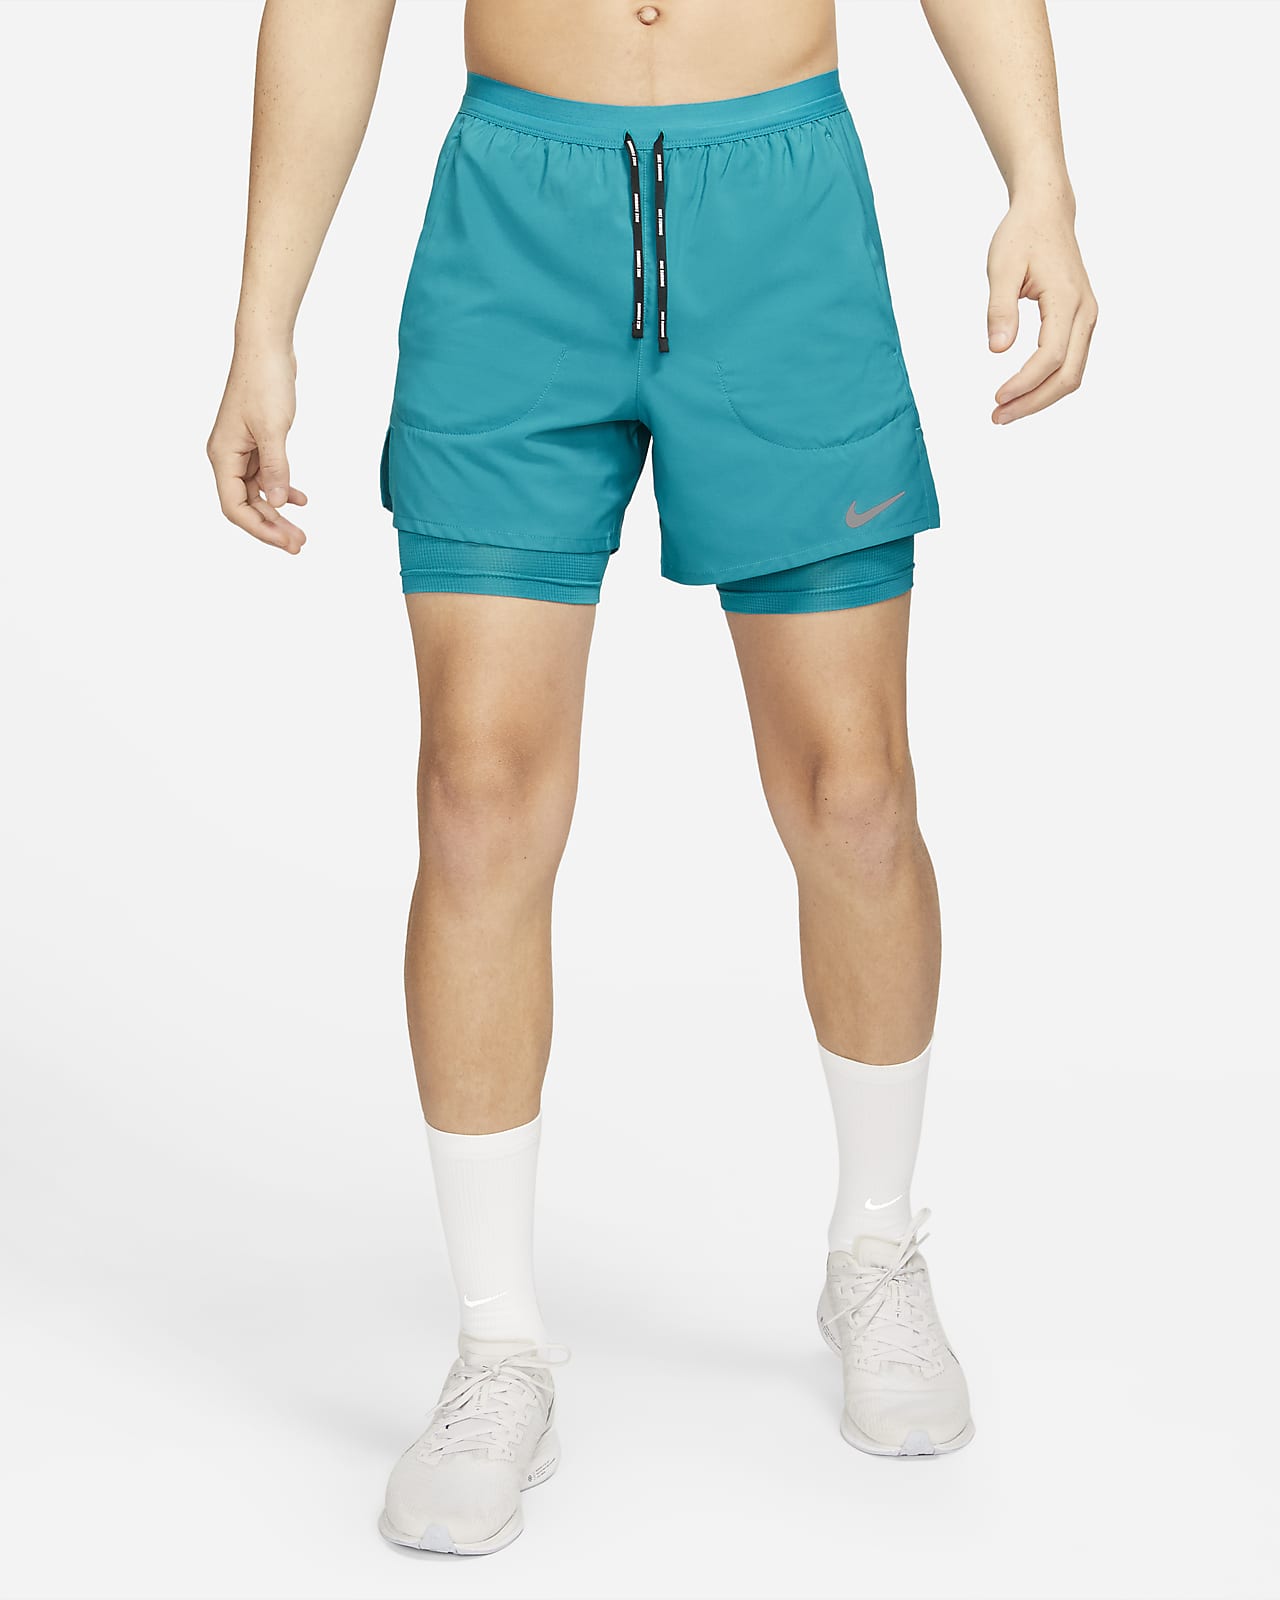 Runner's Guide to Wearing Compression Shorts. Nike NL